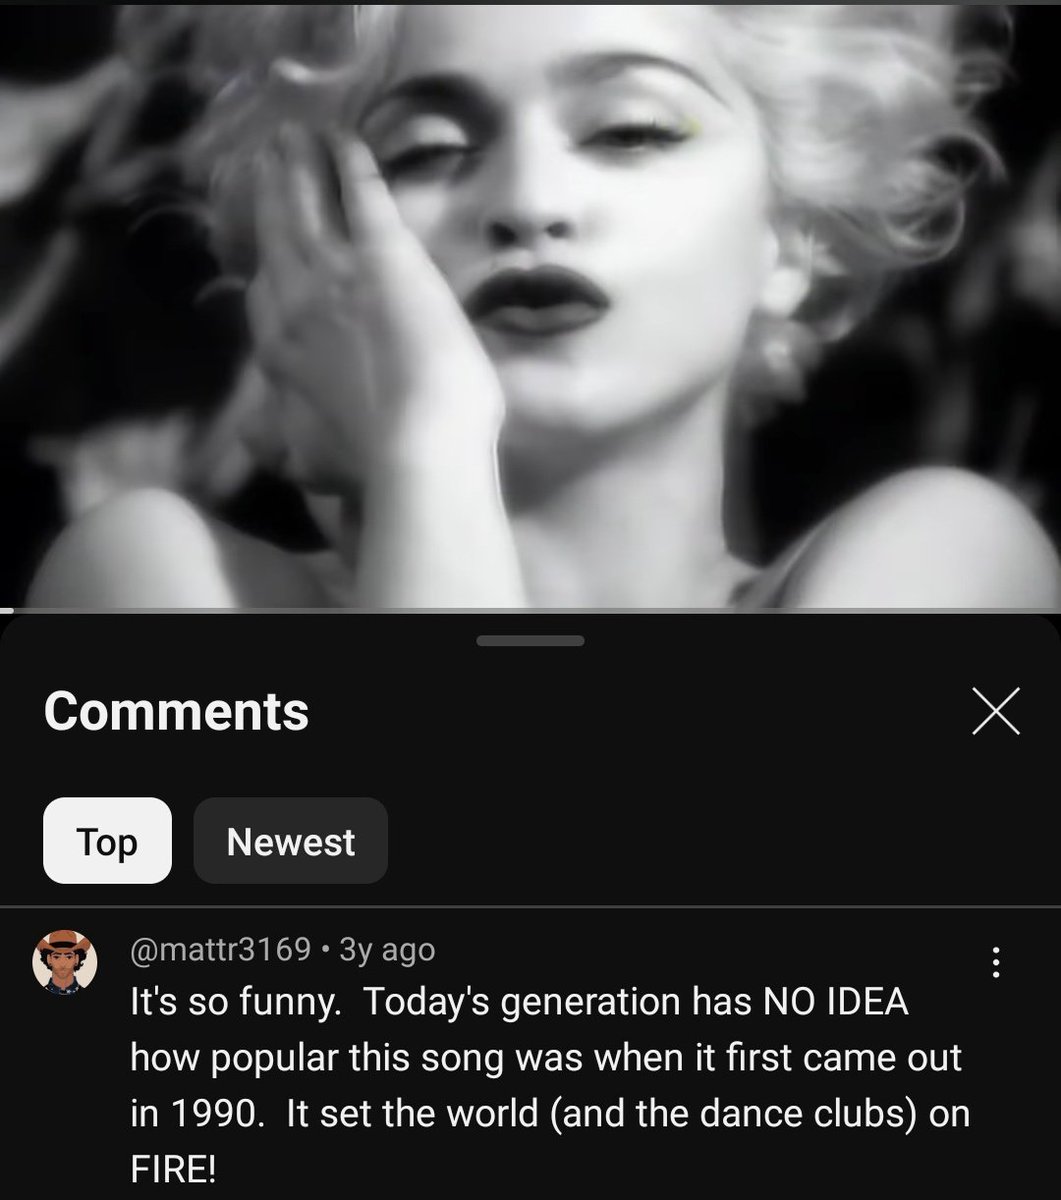 When i see these comments i always think how one day all the people that witnessed Madonna's peak will be gone and we won't have more stories and facts to know 😥